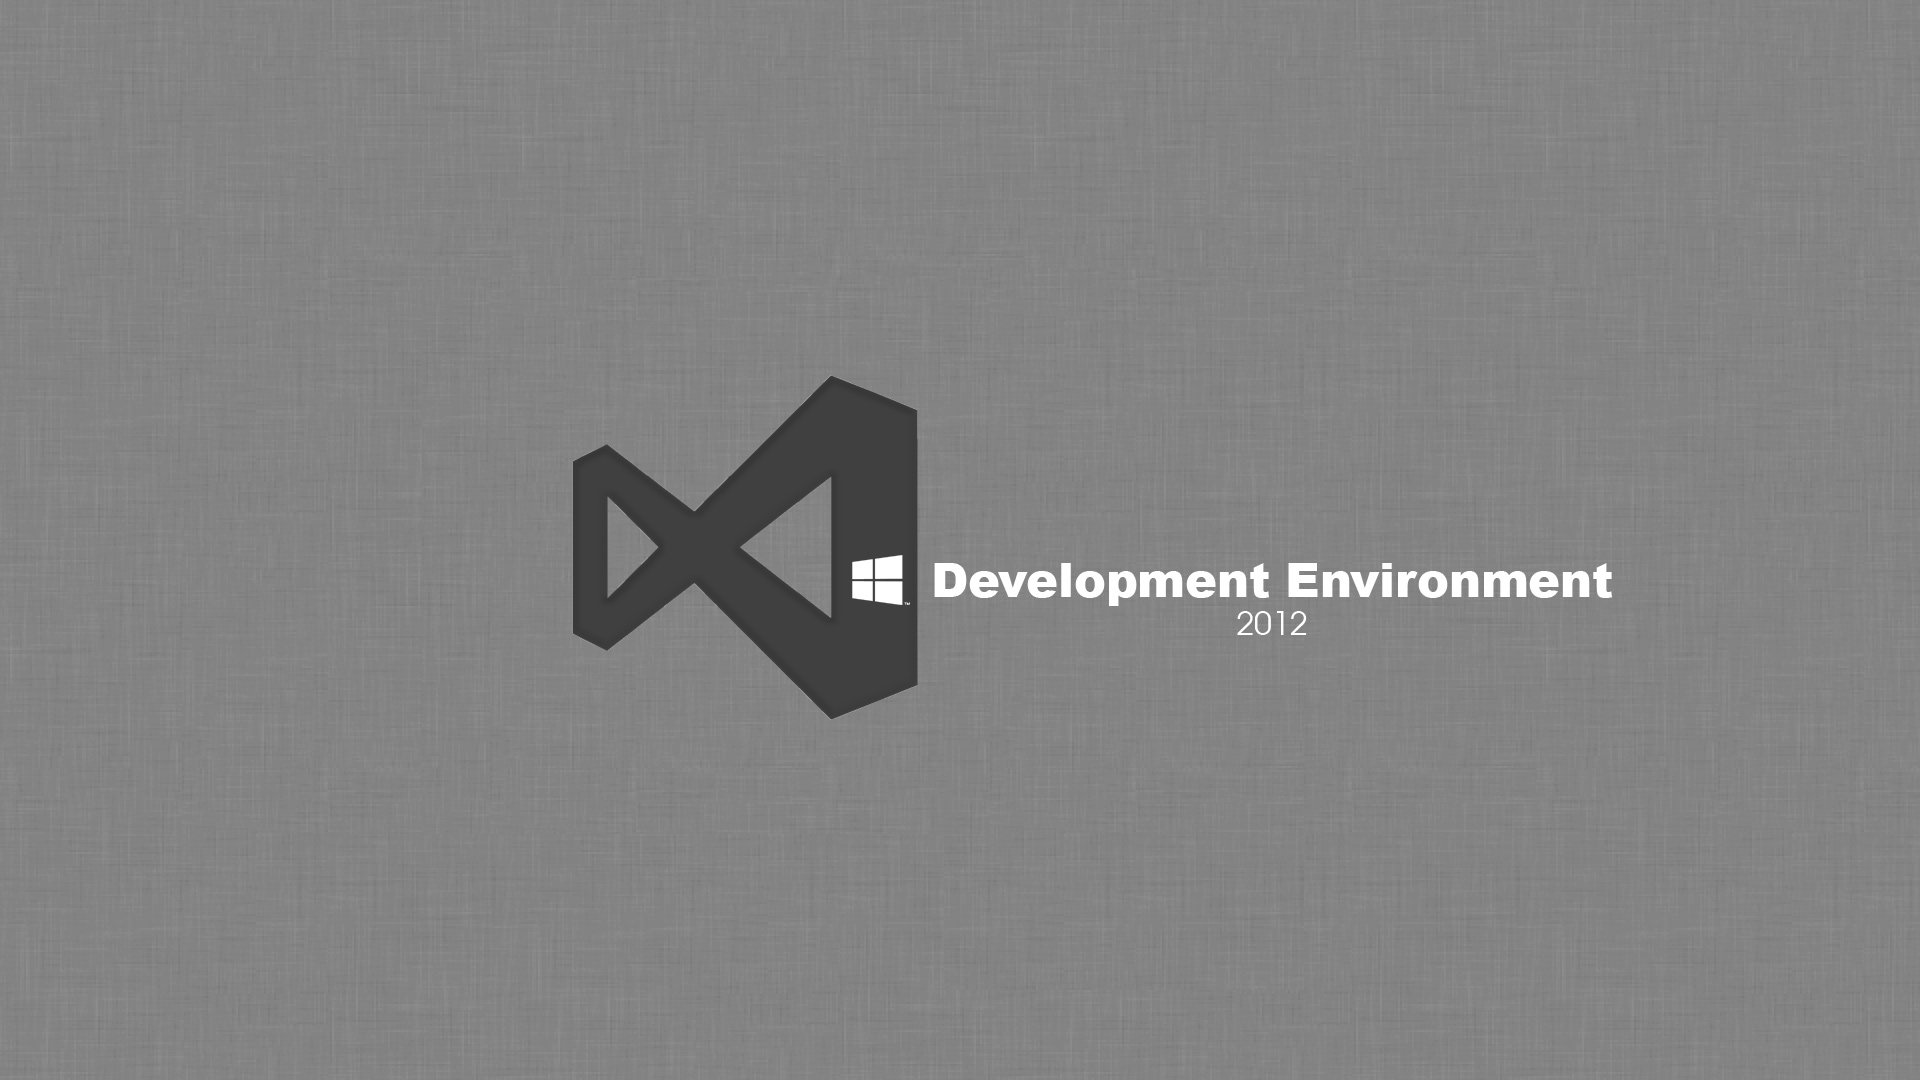 Visual Studio 2012 Wallpapers and Windows Theme v 30 with PSD